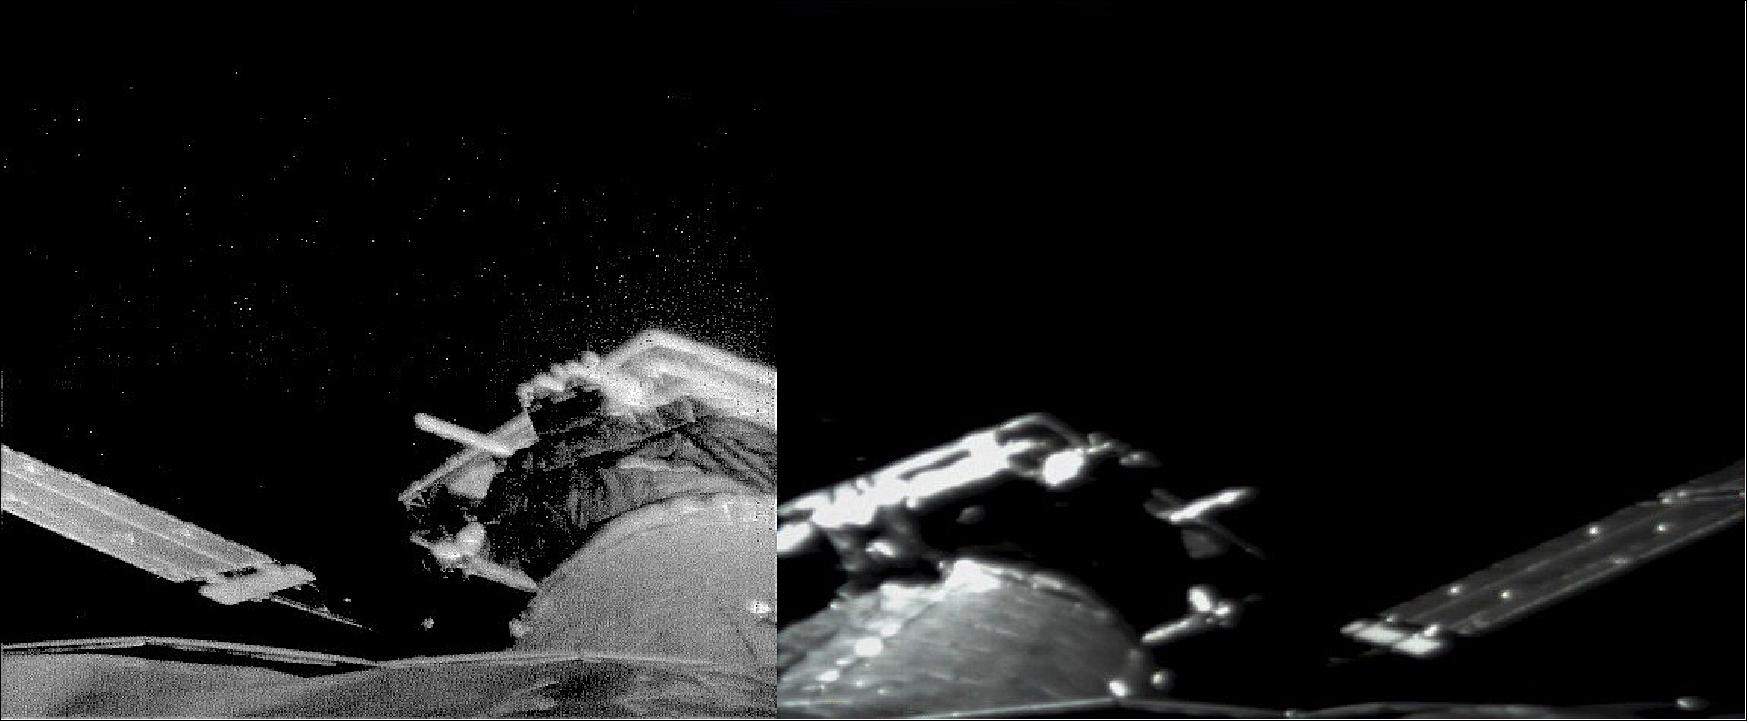 Figure 103: The two images in this collage were taken by the two low-resolution monitoring cameras mounted on opposite sides of the focal plane assembly, looking along the pointing direction of the telescope tube towards the service module (see Figure 104 for an annotated version with explanation). When these images were captured on 14 September 2016 at 06:50 GMT, XMM-Newton was in its 3070th orbit at around 50,000 km altitude and in contact with mission controllers at ESA’s mission control in Darmstadt, Germany, via the antenna at Kourou, French Guiana.